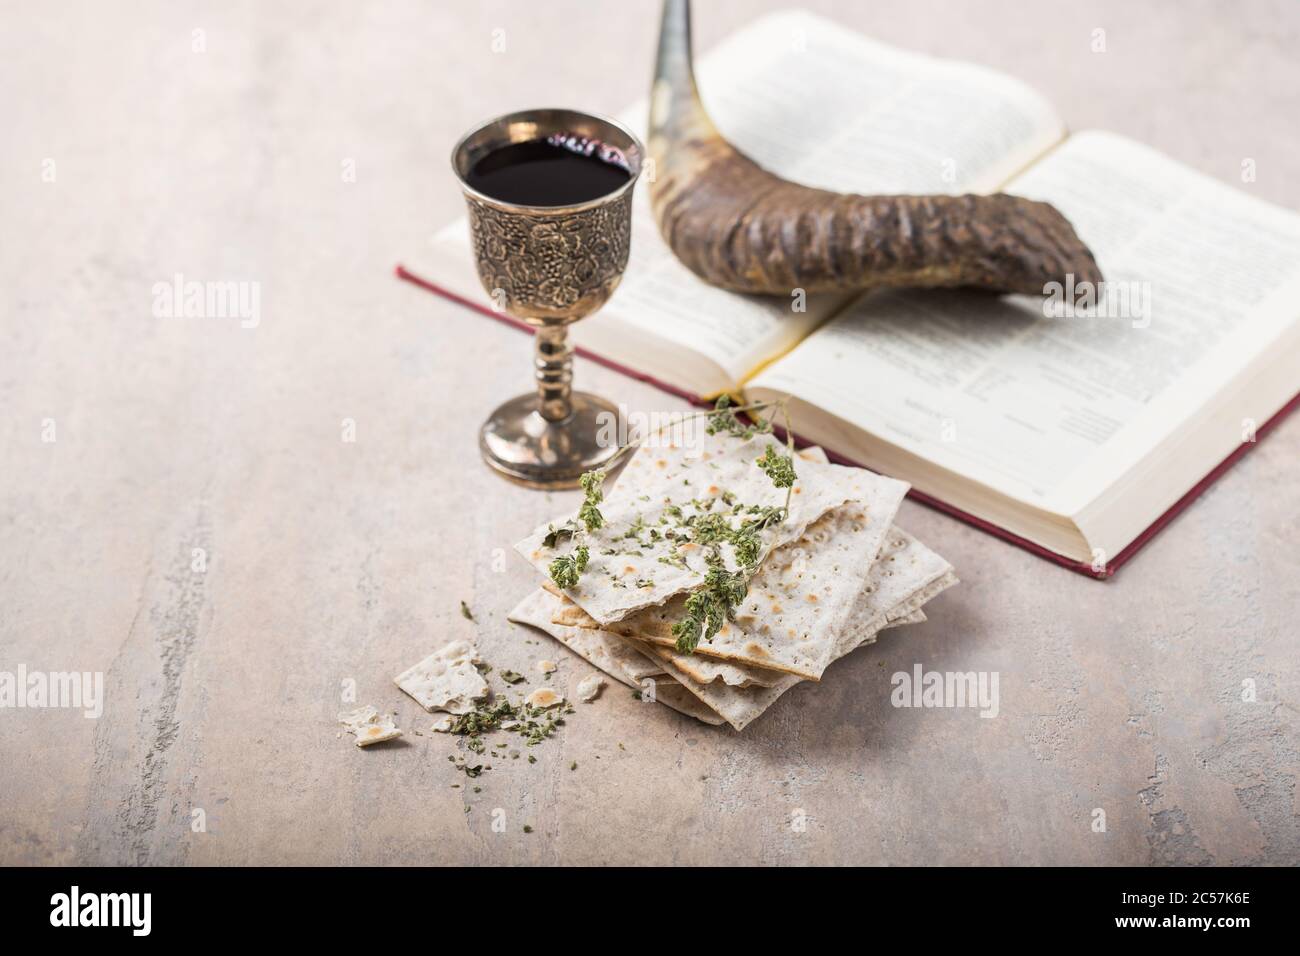 Pack of matzah or matza, Passover Haggadah and Kosher red wine, shofar-horn on a concrete background. Stock Photo